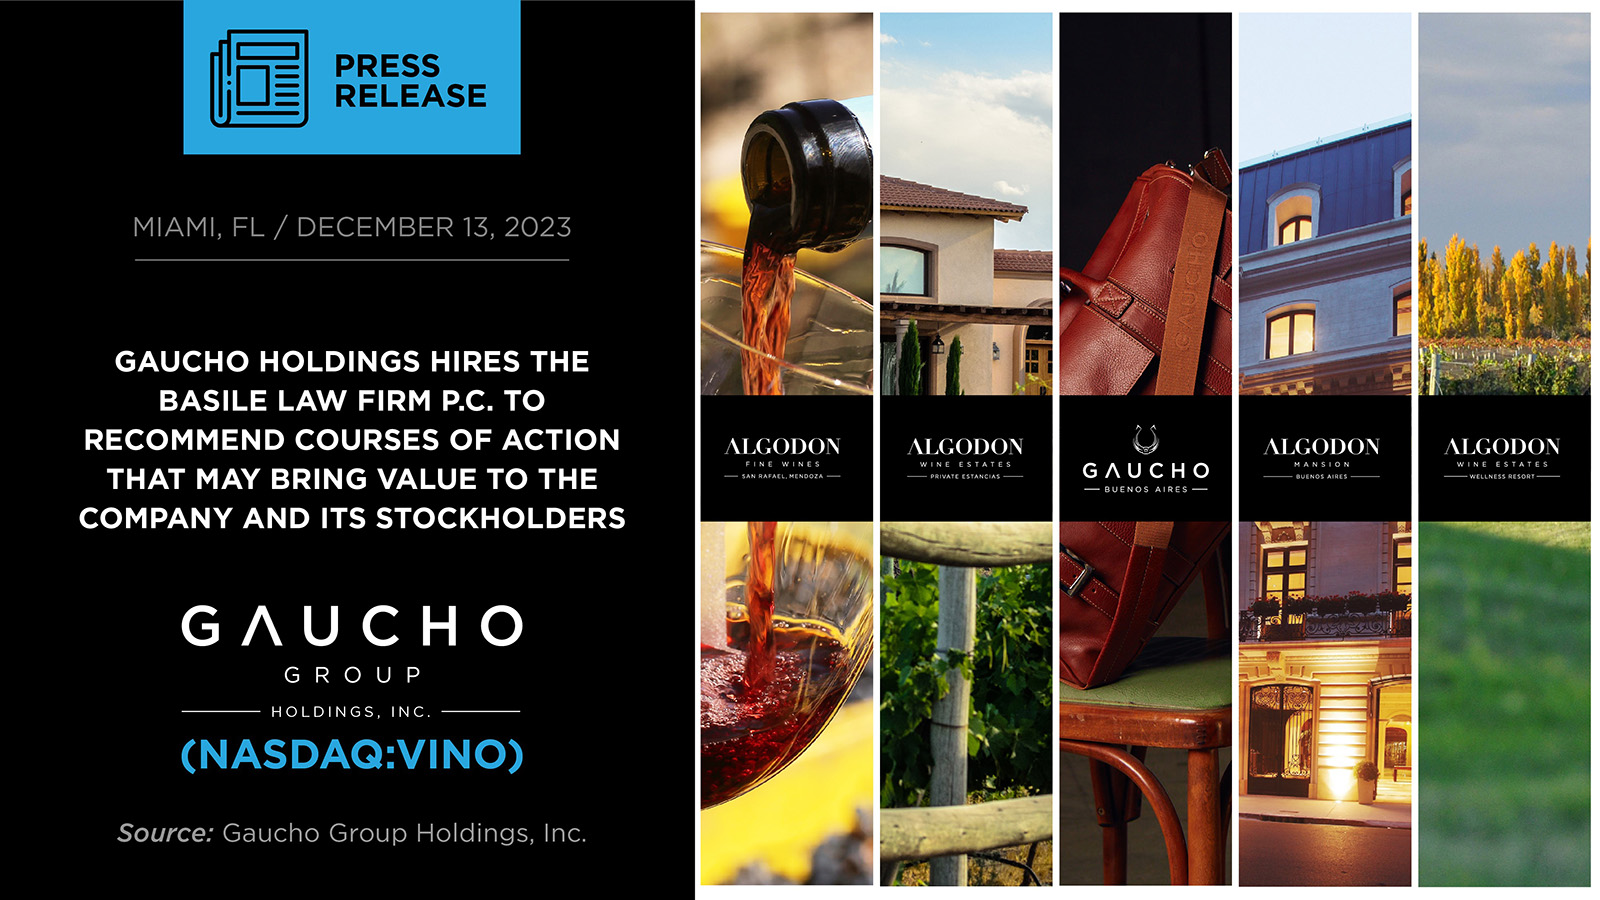 Gaucho Holdings Hires the Basile Law Firm p.c. To Recommend Courses of Action That May Bring Value to the Company and Its Stockholders